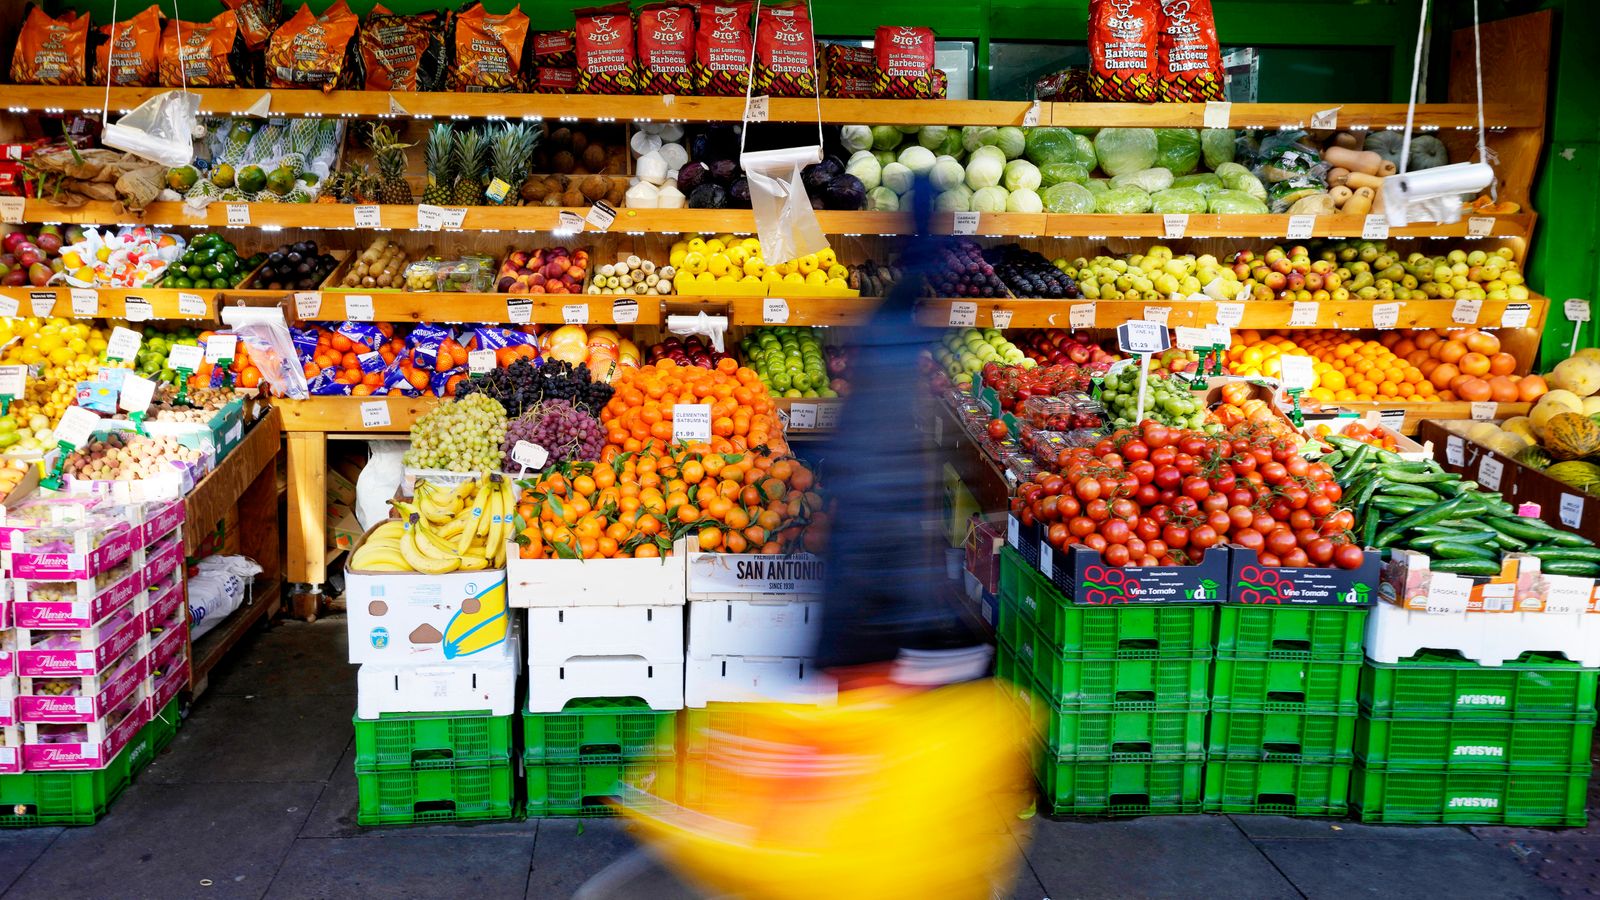 Food inflation 8.8% in year to October, BRC and NielsenIQ say